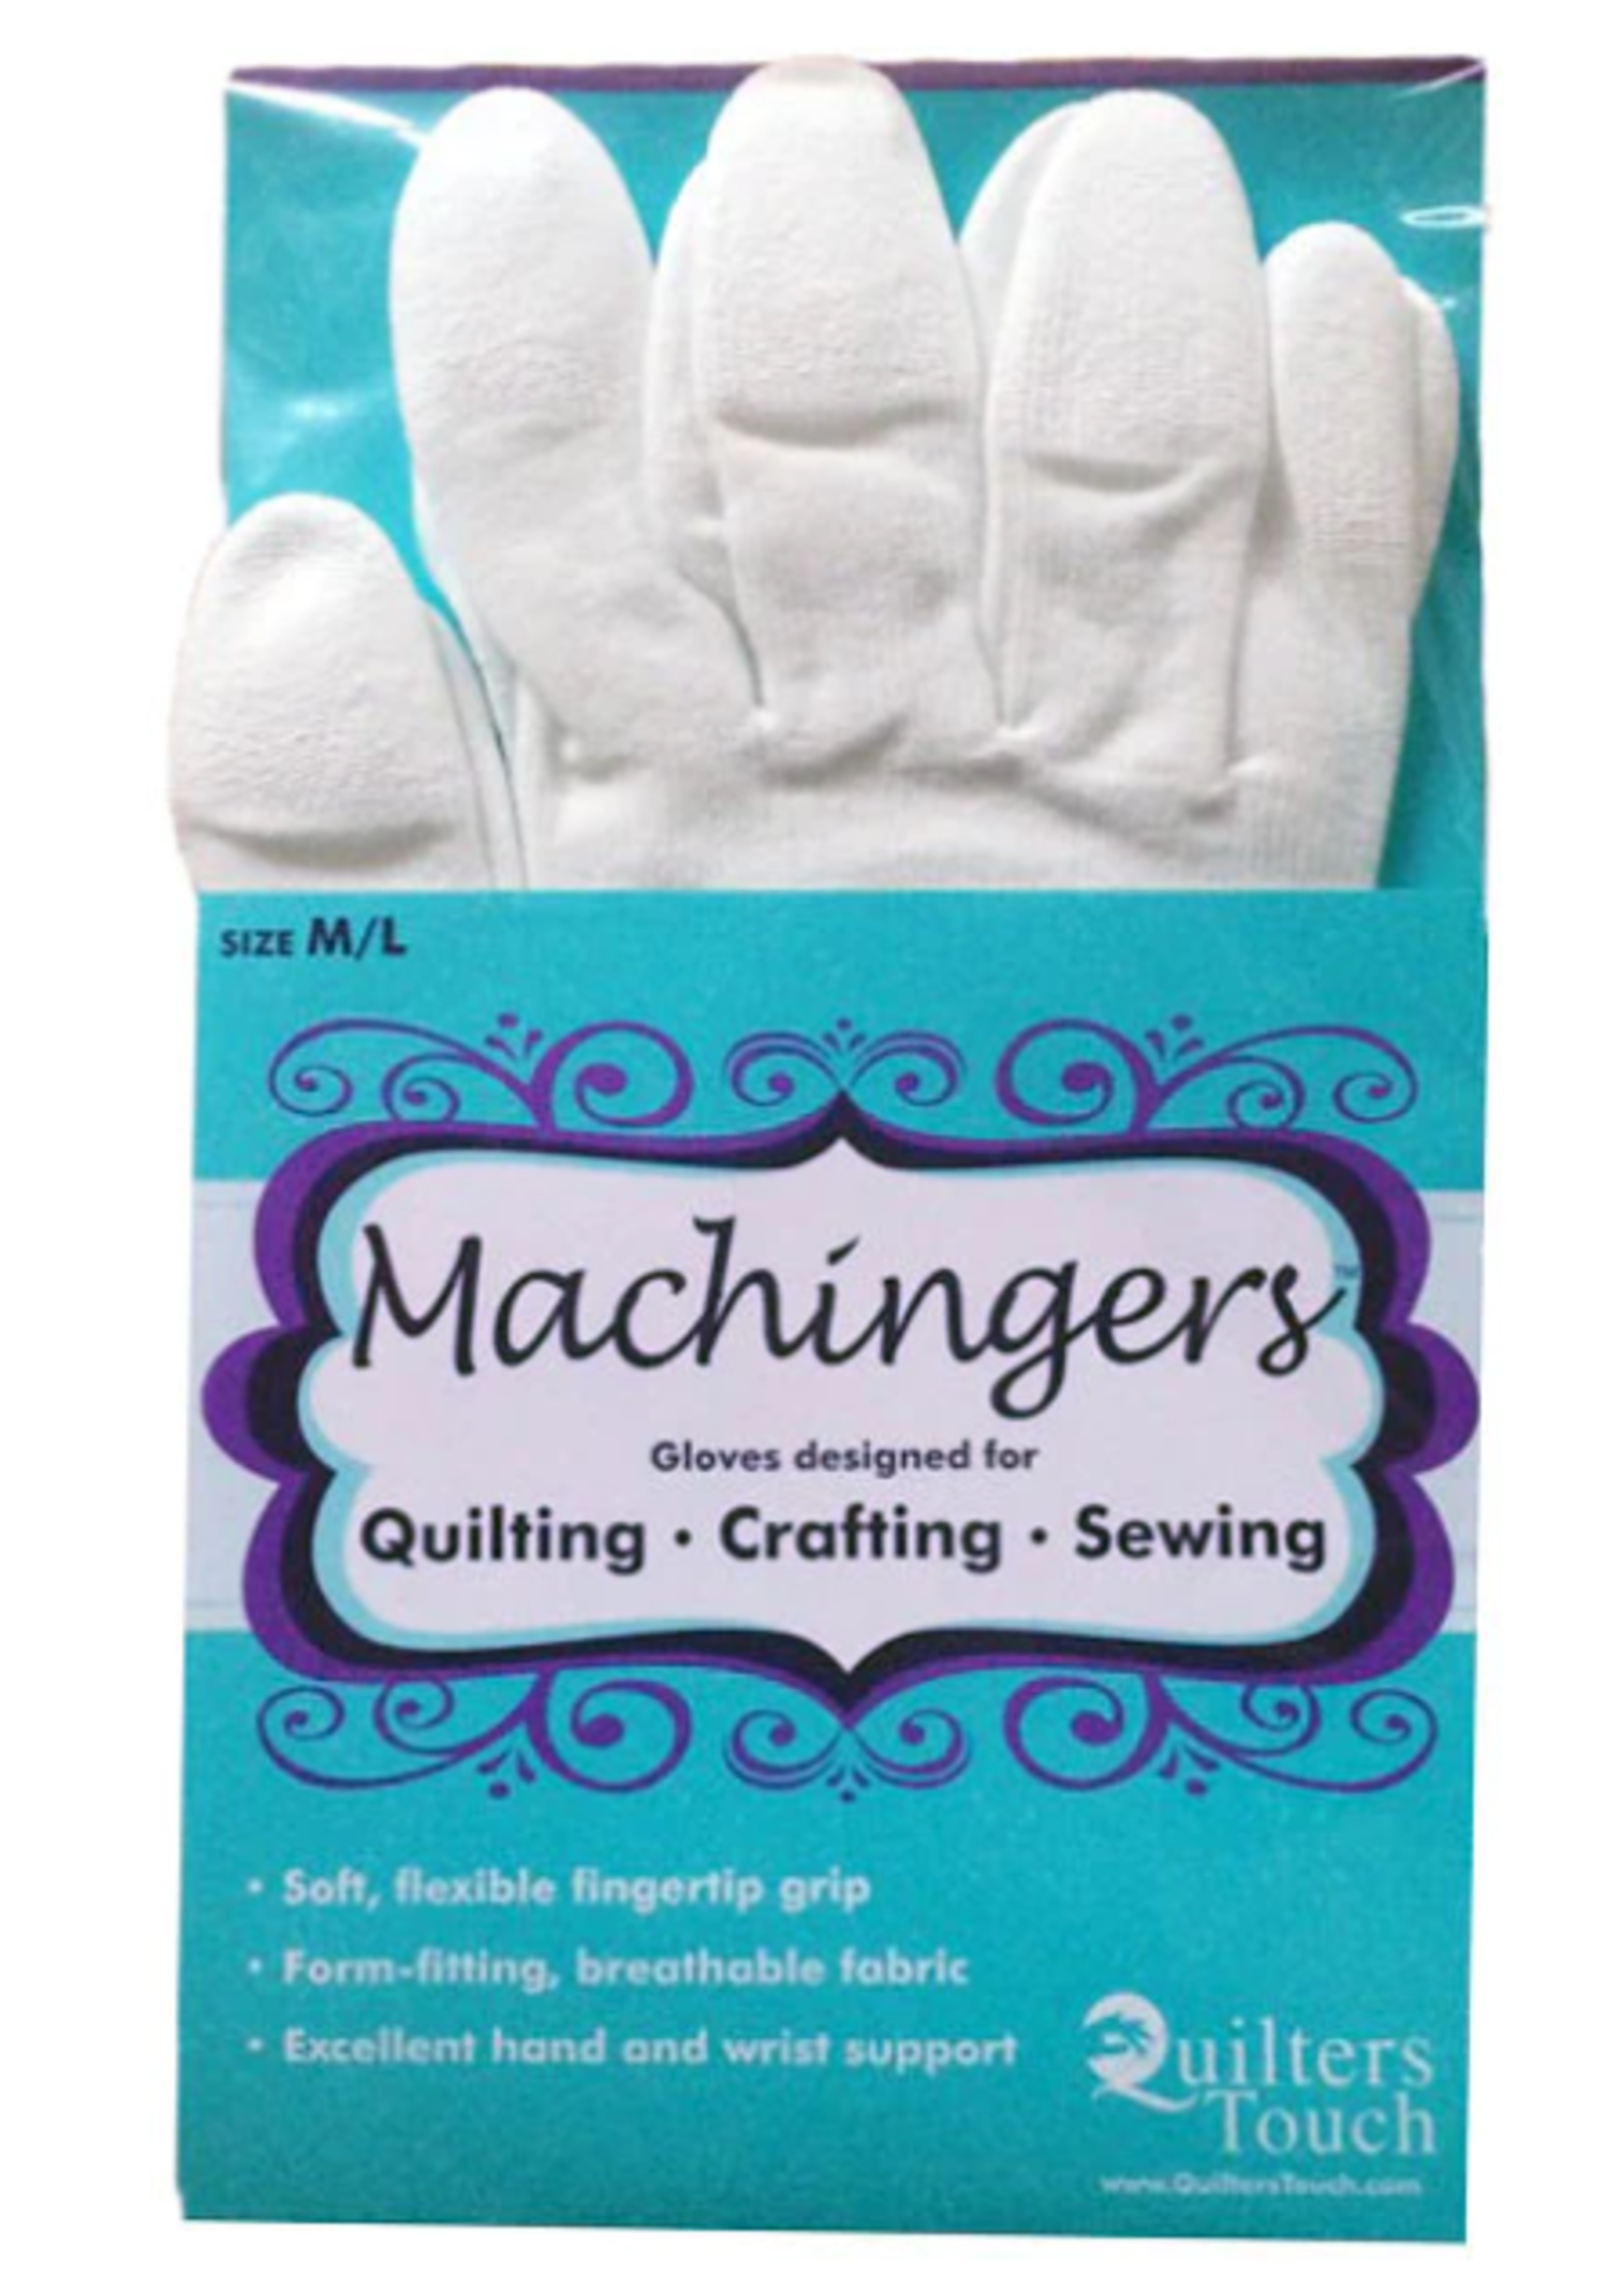 Quilters Touch Machingers Quilting Glove Medium / Large